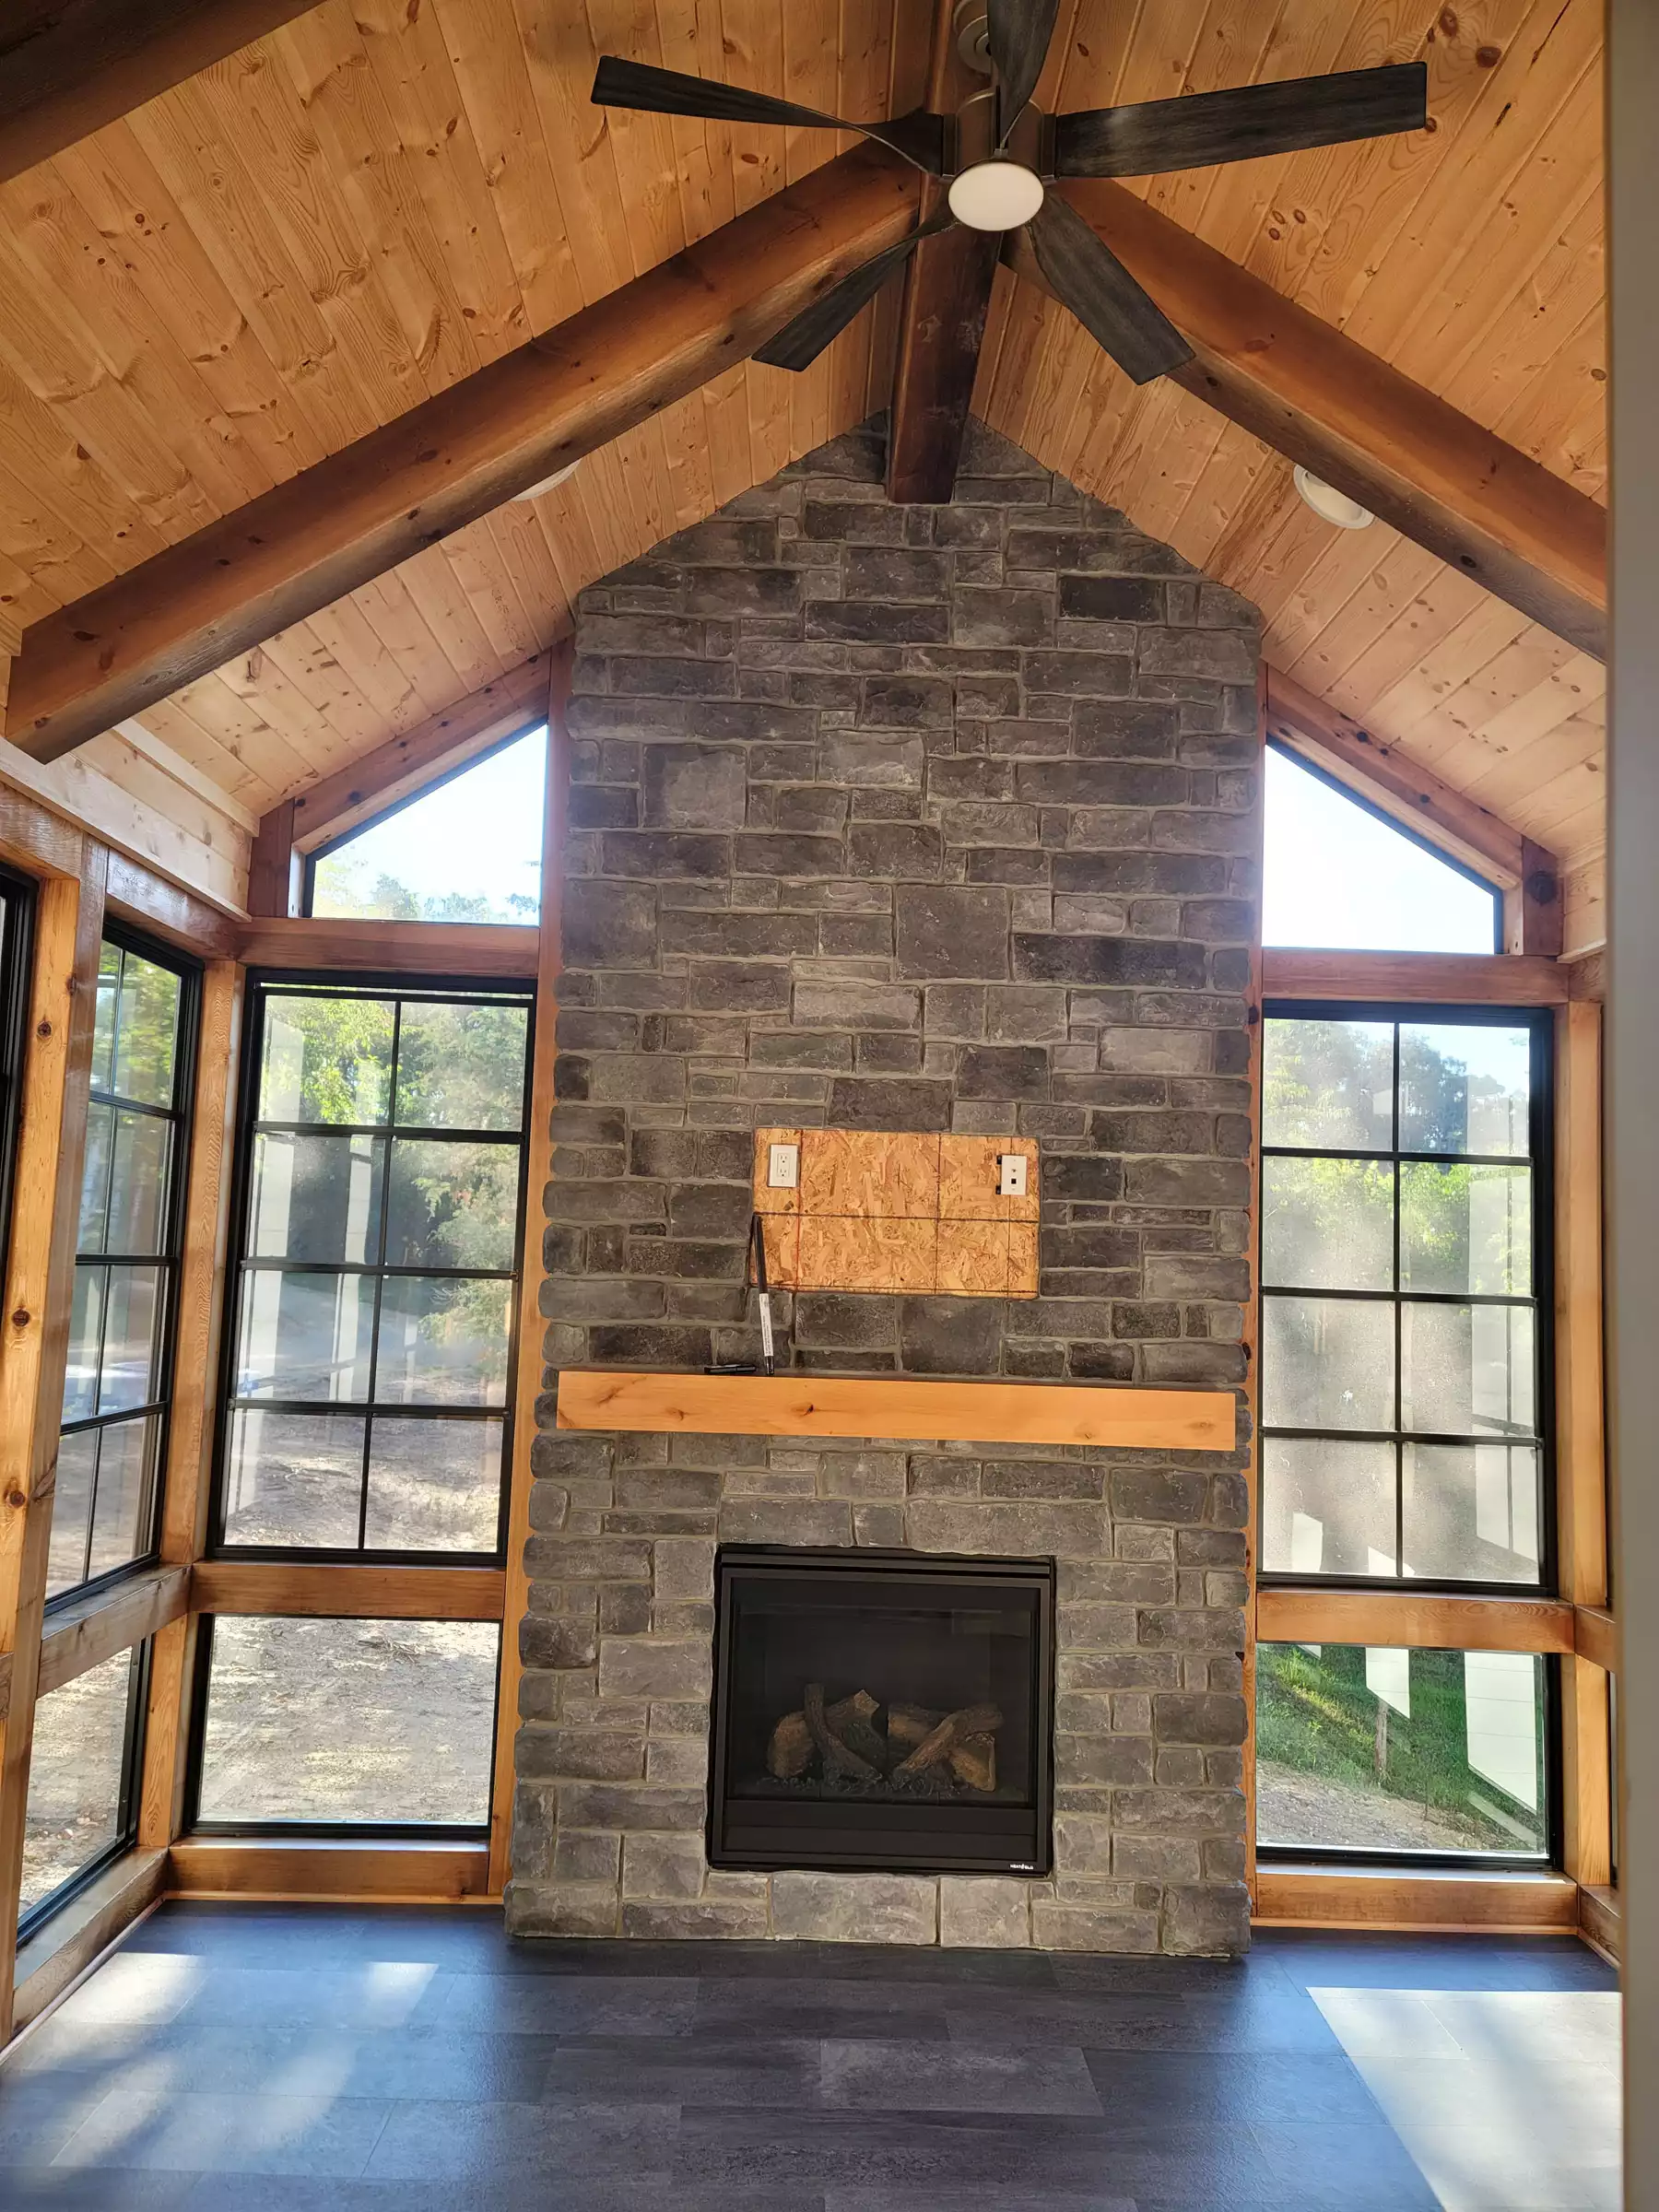 Vaulted 4-track porch with fireplace